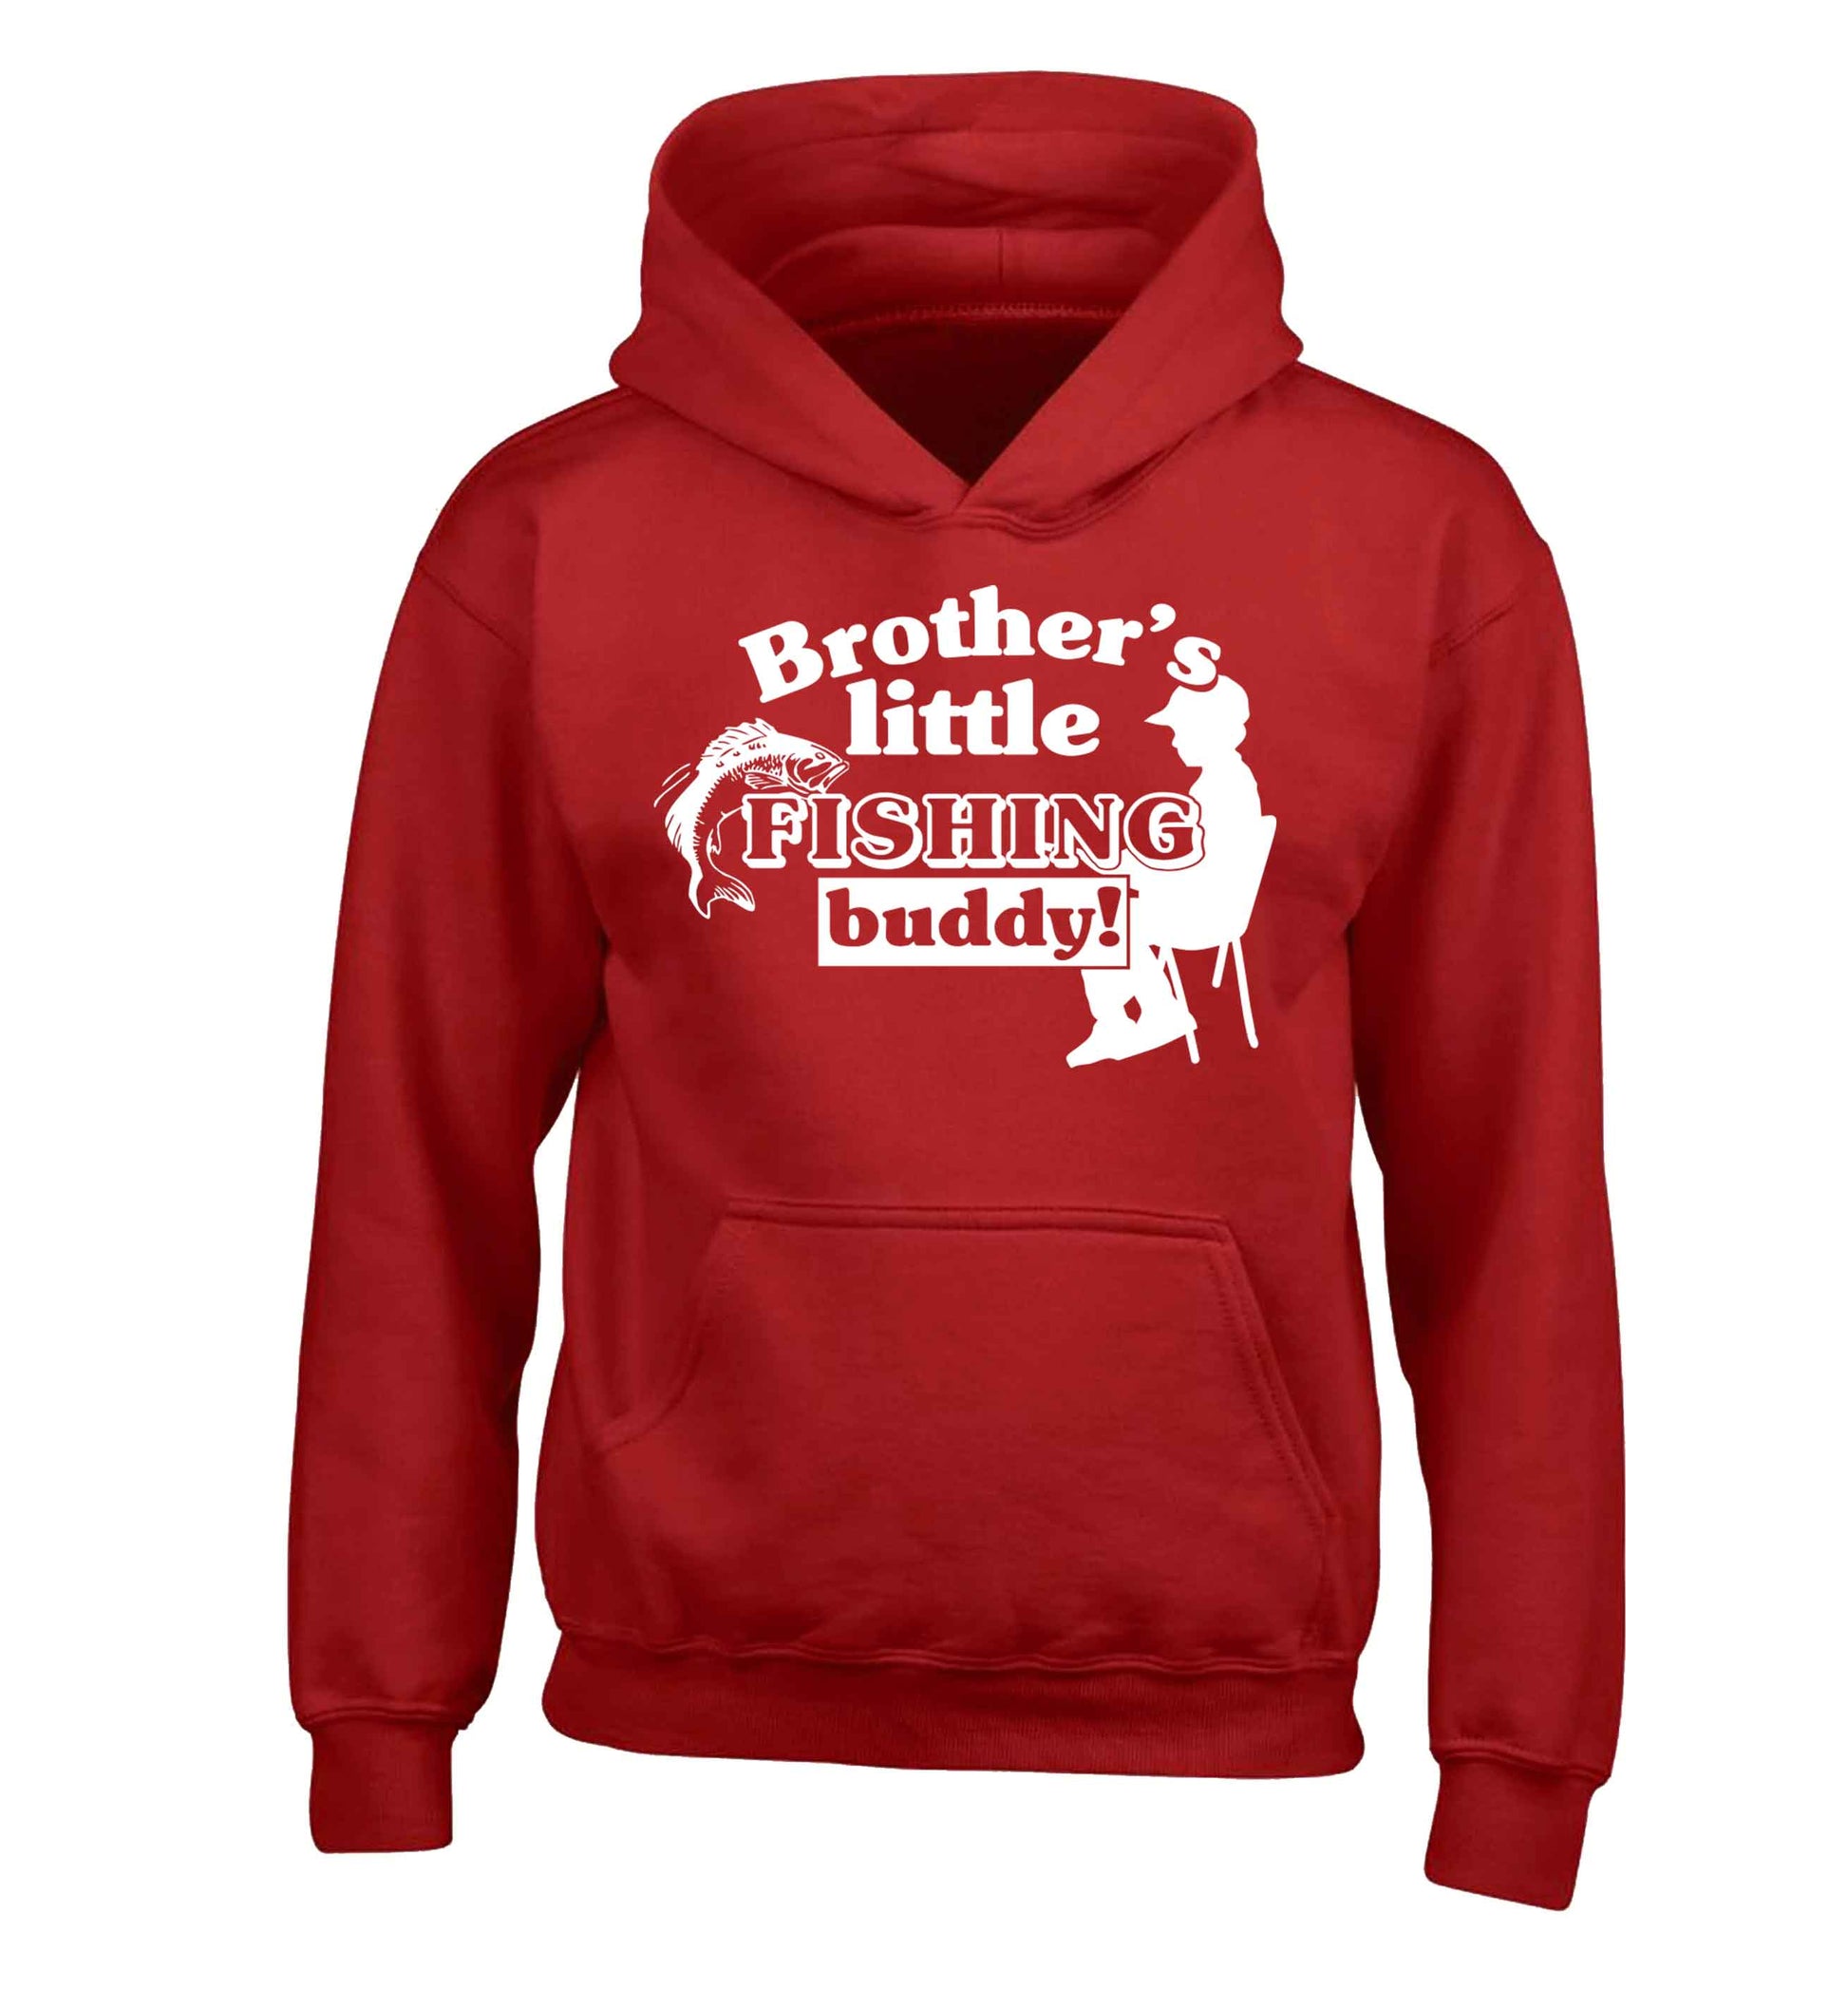 Brother's little fishing buddy children's red hoodie 12-13 Years